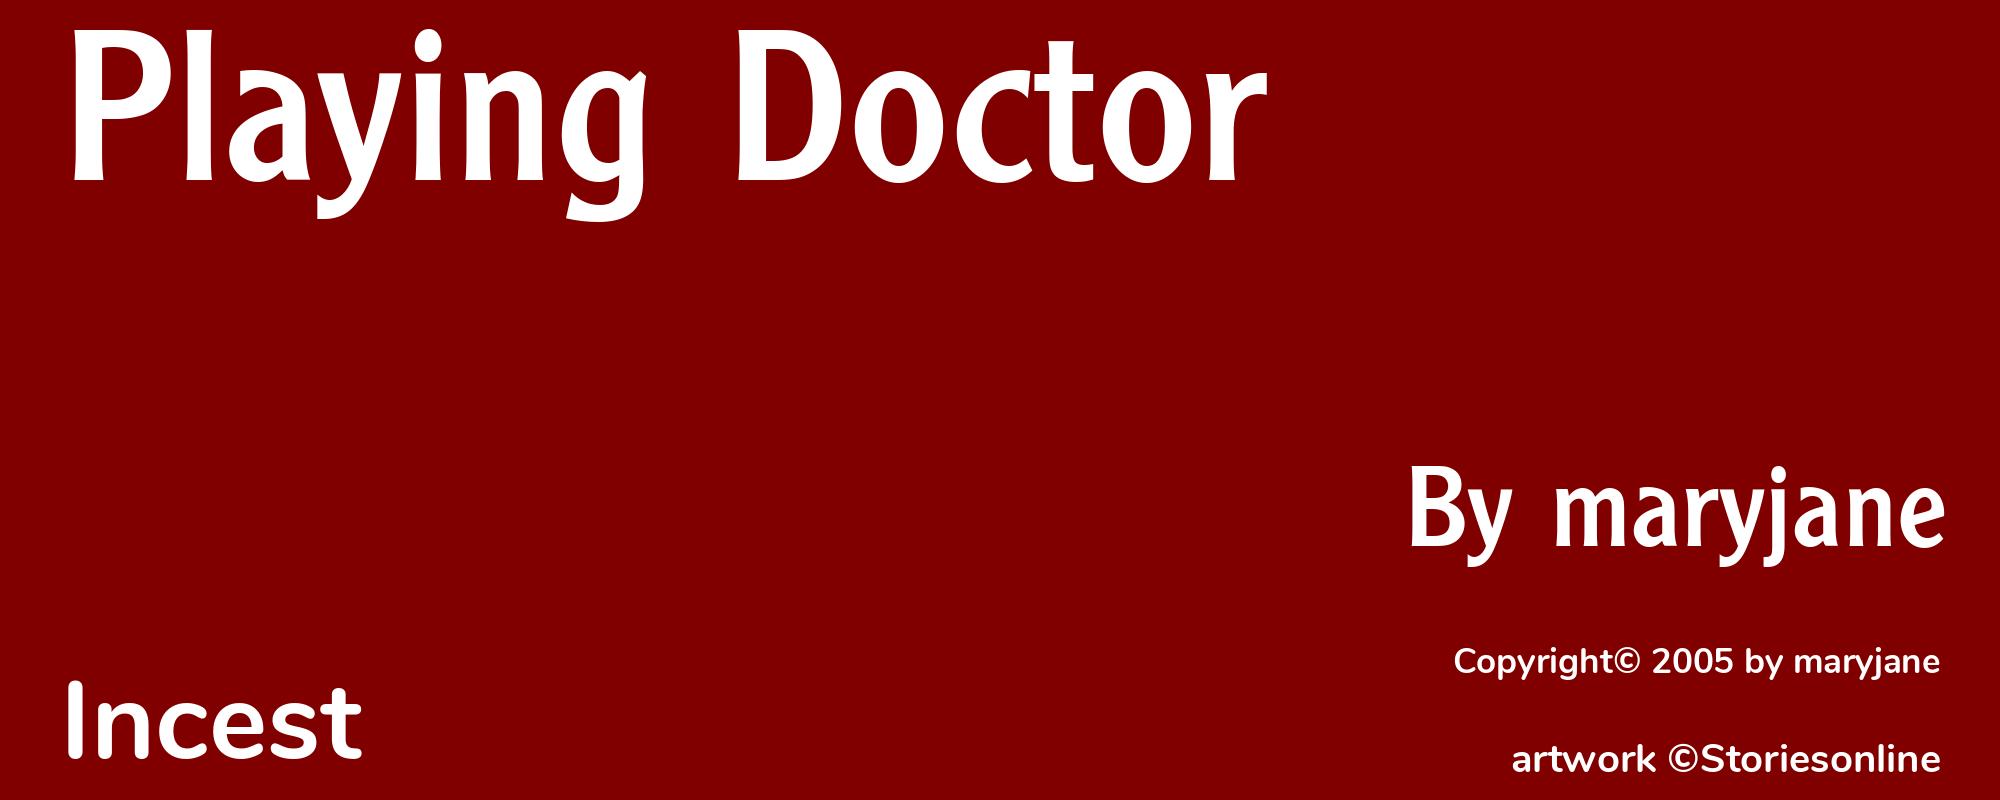 Playing Doctor - Cover